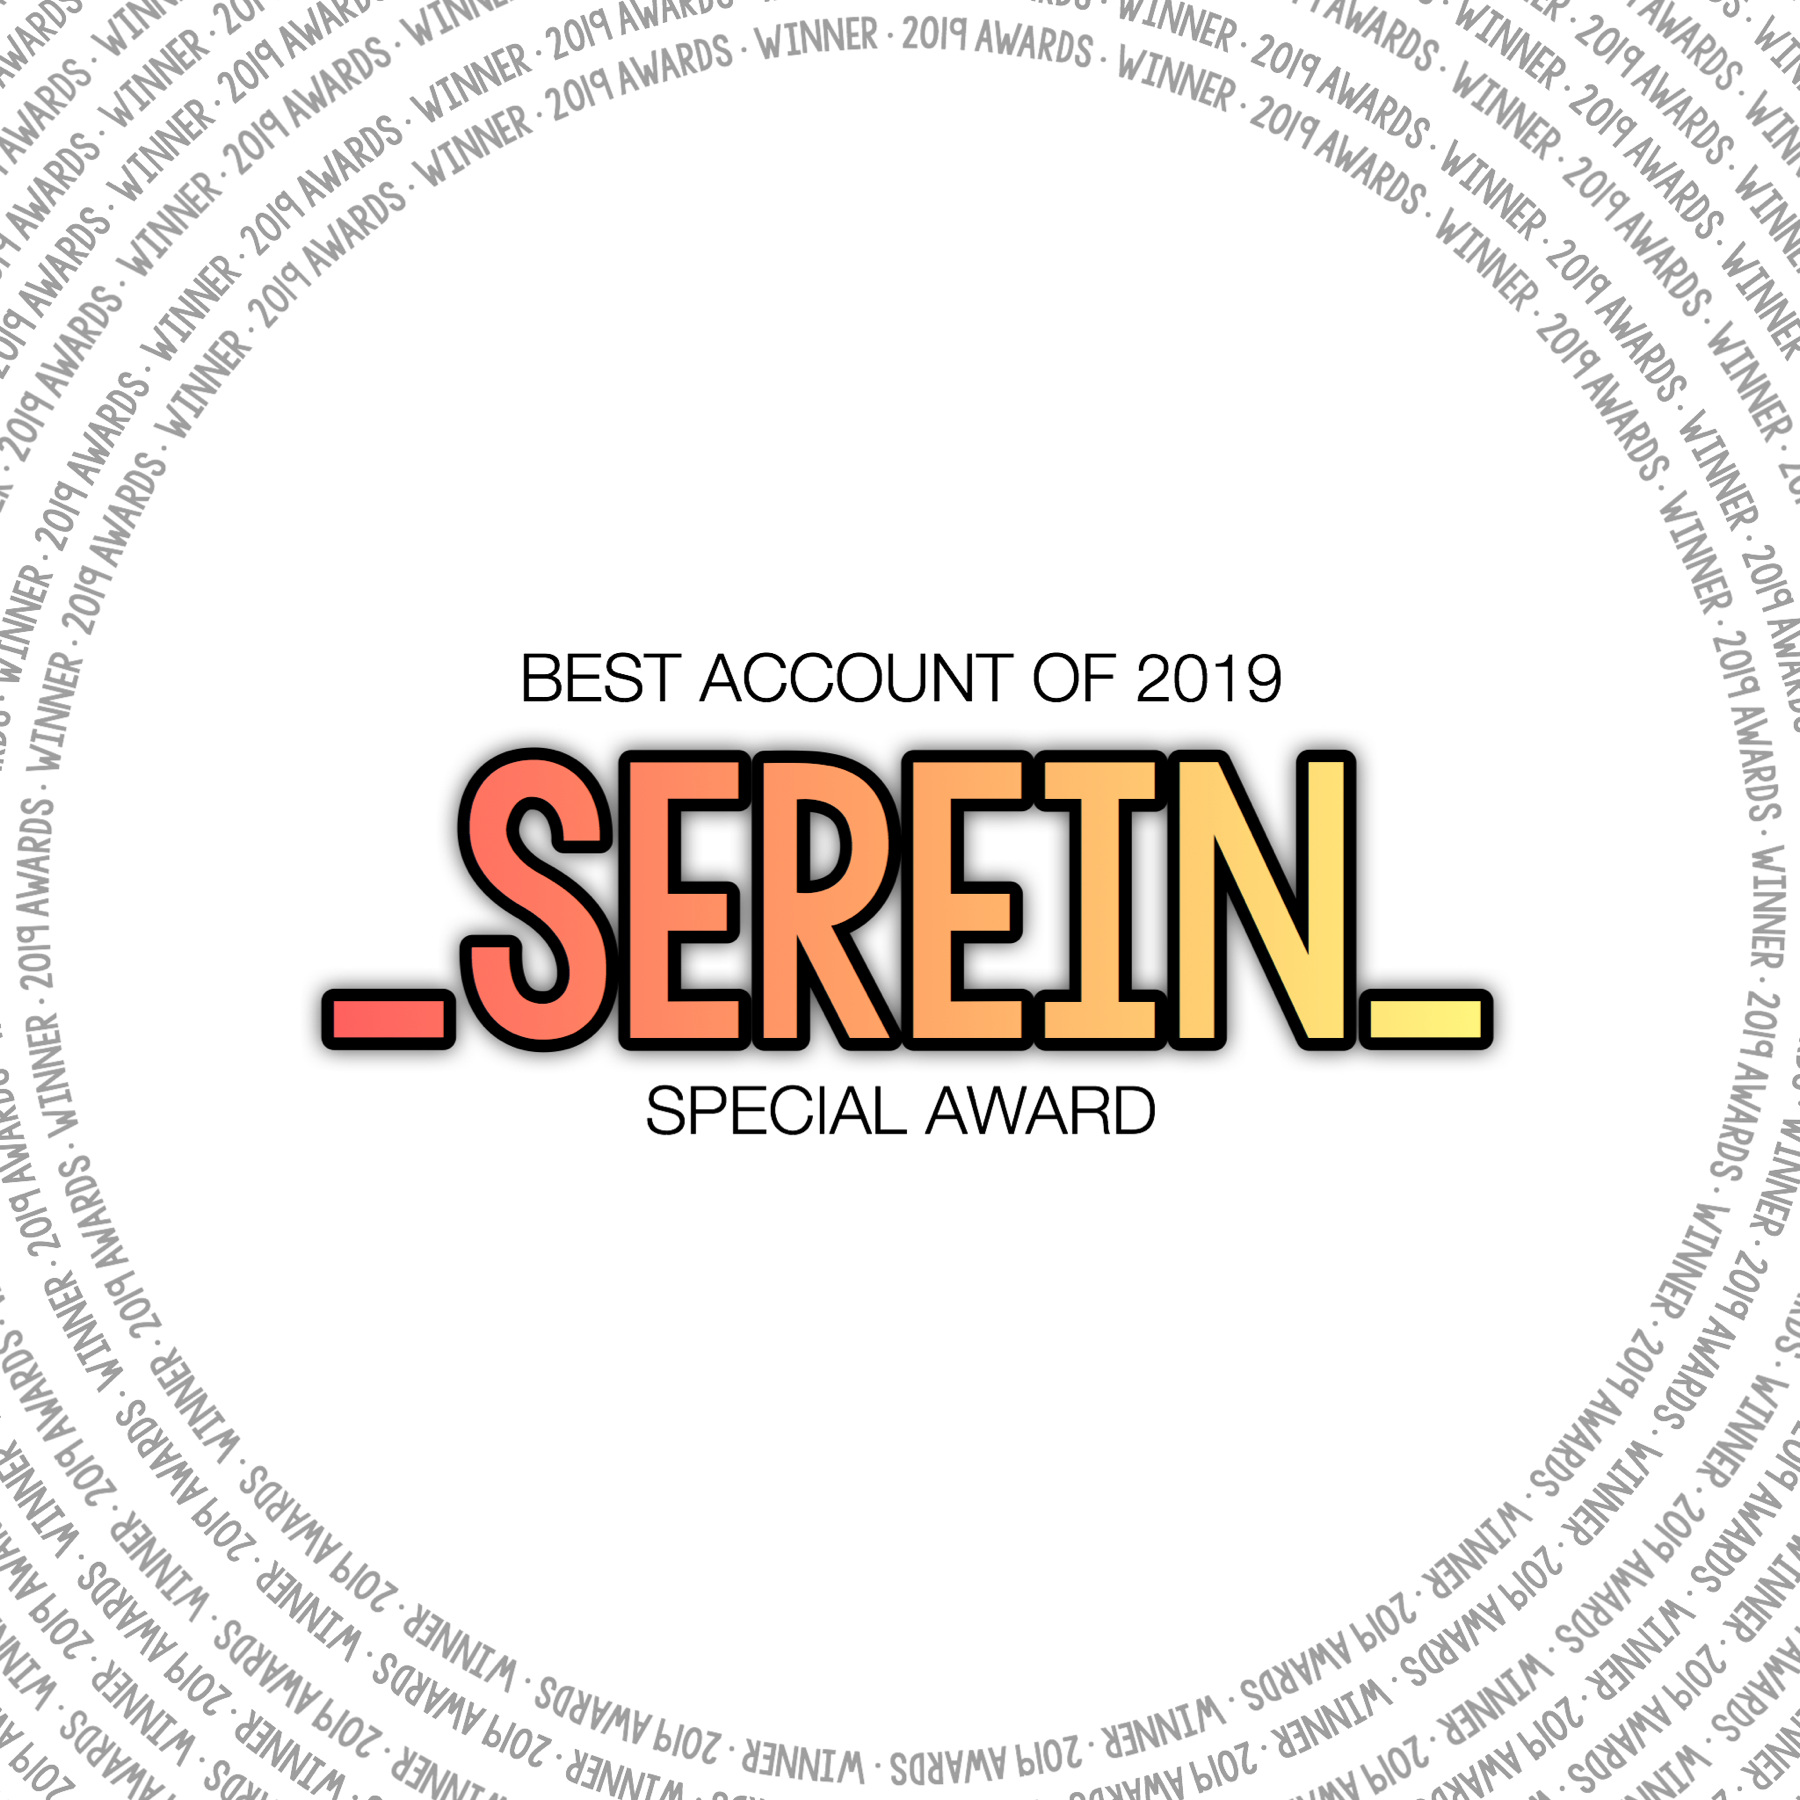 Congratulations @_serein_!

The vote count will be in the remixes